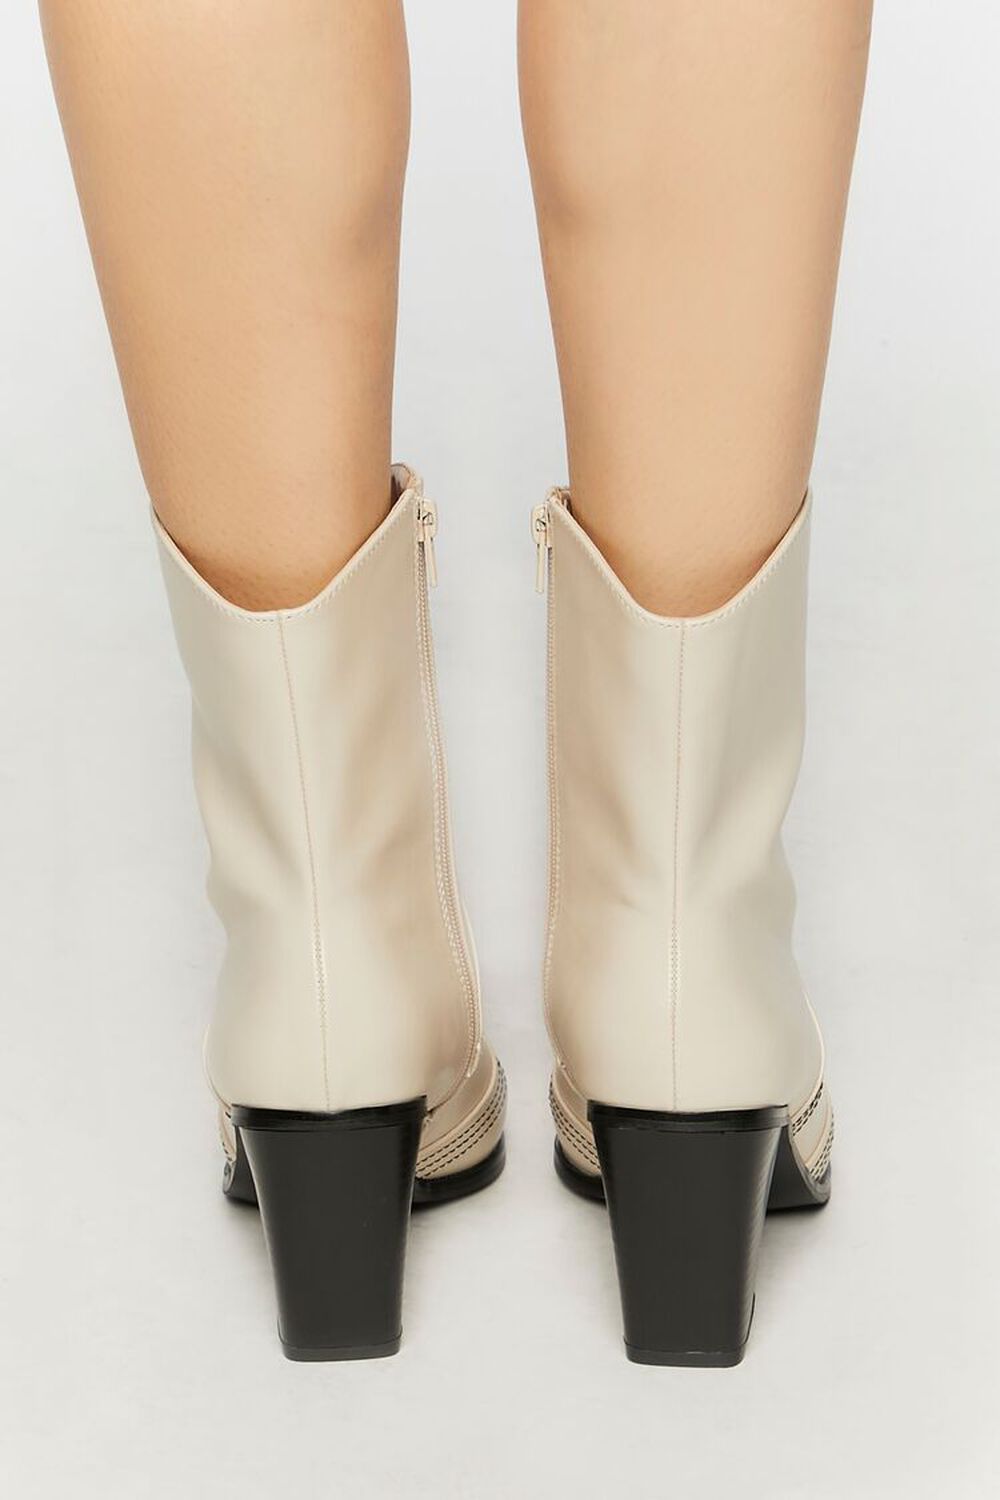 WHITE Faux Leather Contrast Cowboy Boots, image 3